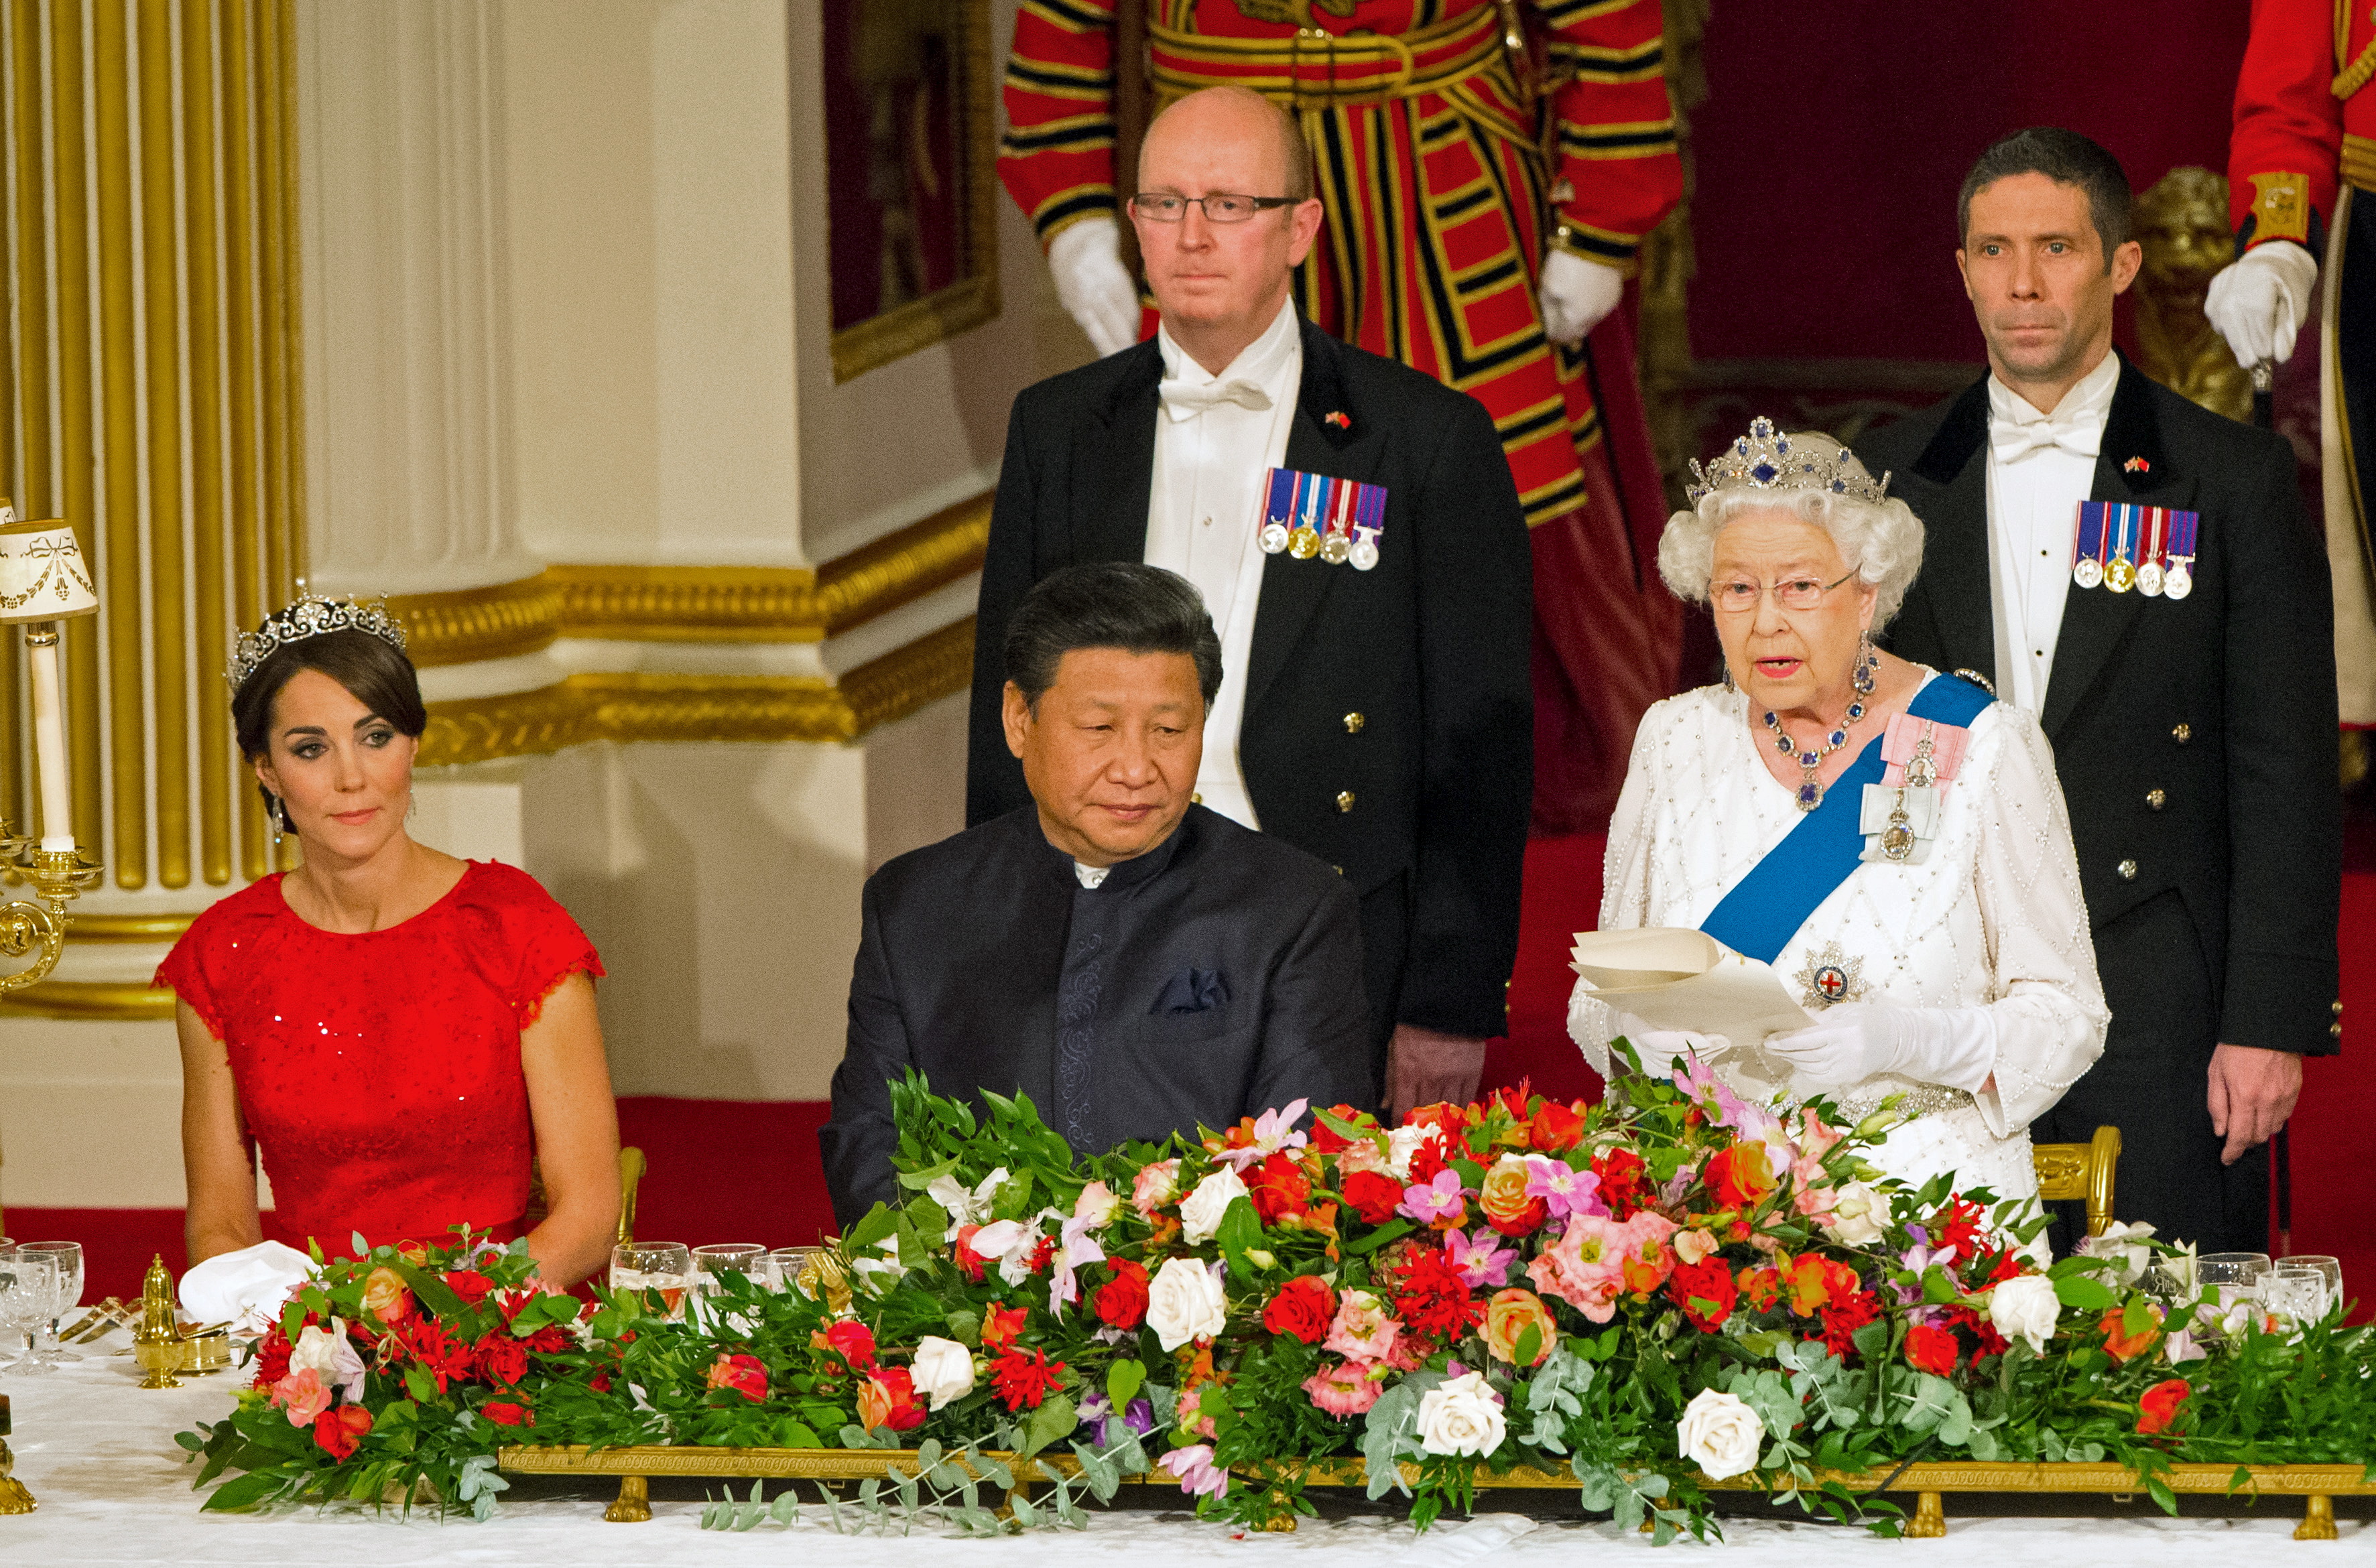 The Duchess of Cambridge and Chinese President Xi Jinping listen as Queen Elizabeth II speaks at a state banquet at Buckingham Palace, London, during the first day of his state visit to the U.K. on Oct. 20, 2015 (Reuters)